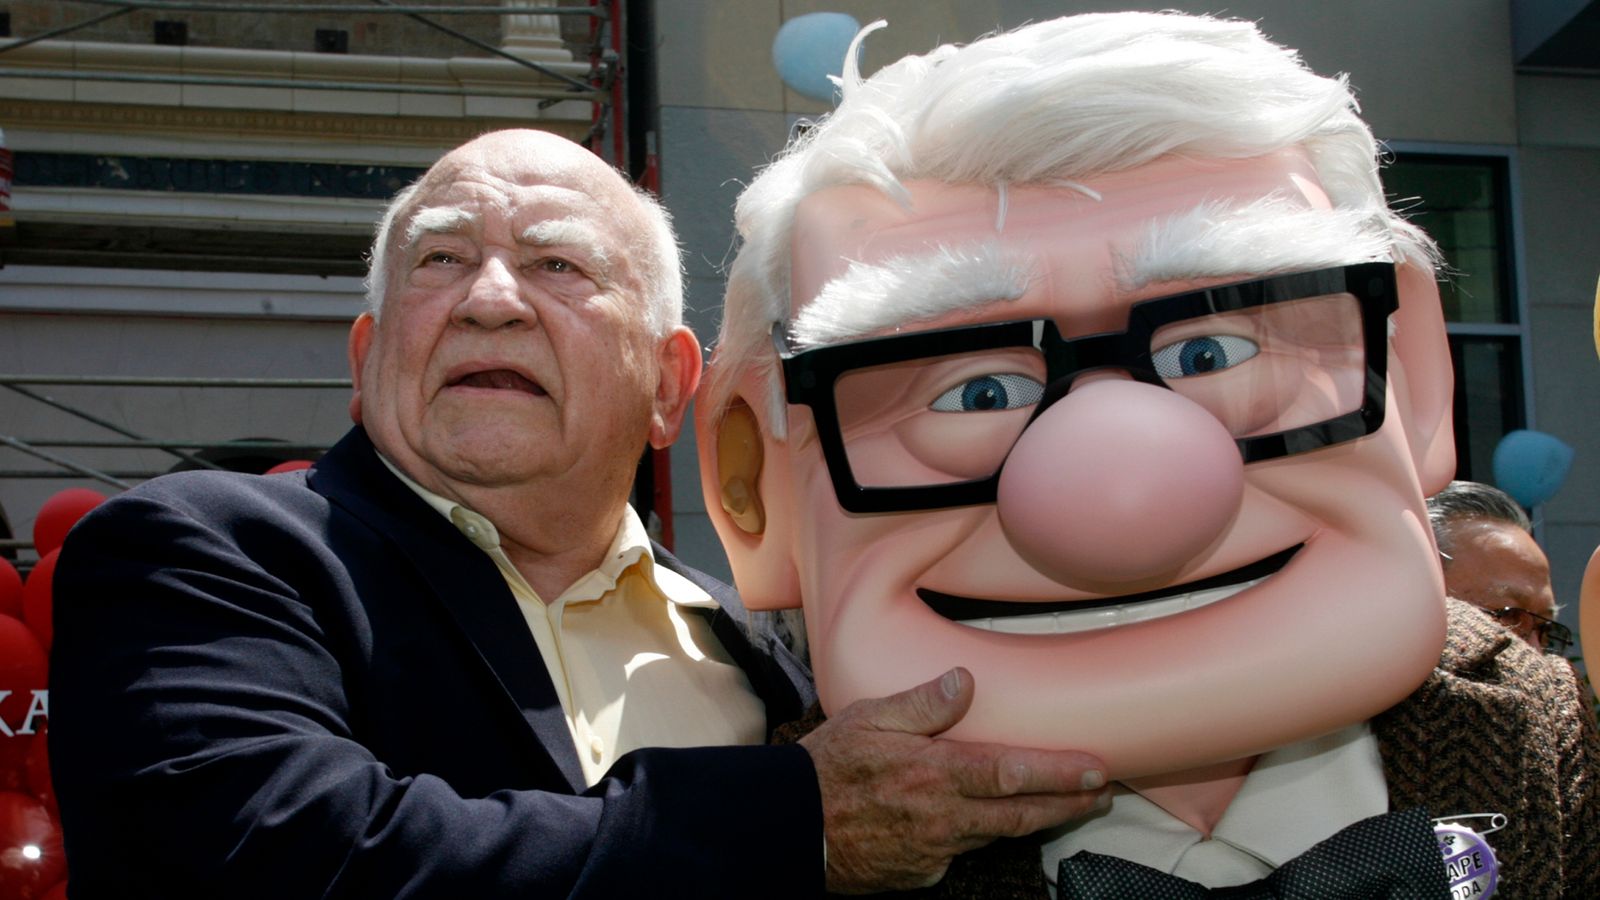 Ed Asner Emmy Winning Actor Who Became Known For Leading Voice Role In Pixar Film Up Dies Aged 